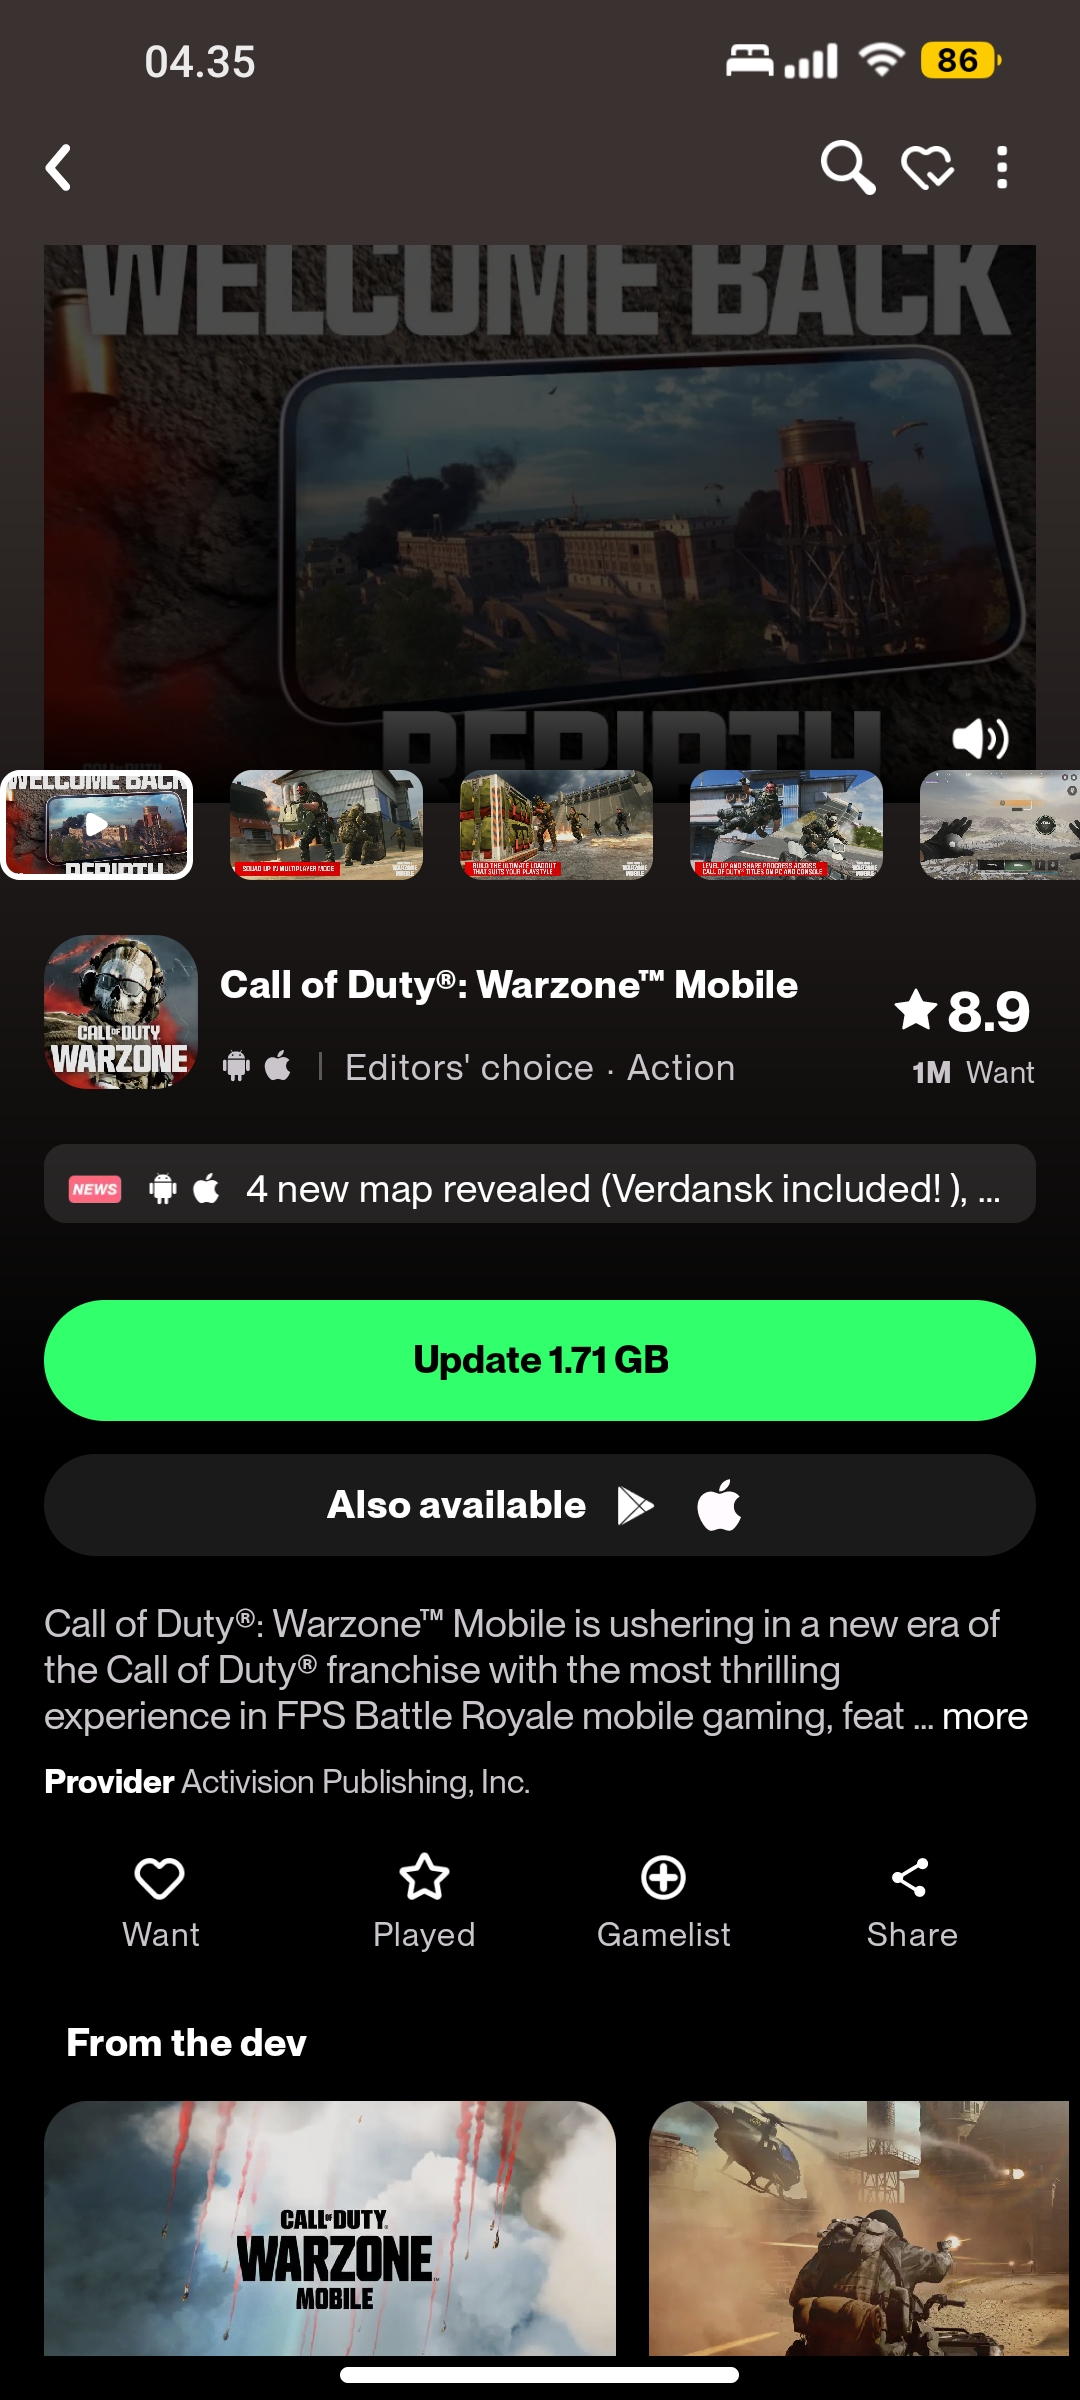 How to Create Warzone mobile account/ How to Login Warzone mobile/ Activision  Account - Call of Duty - Call of Duty®: Warzone™ Mobile - Call of Duty  Warzone Mobile BR - TapTap